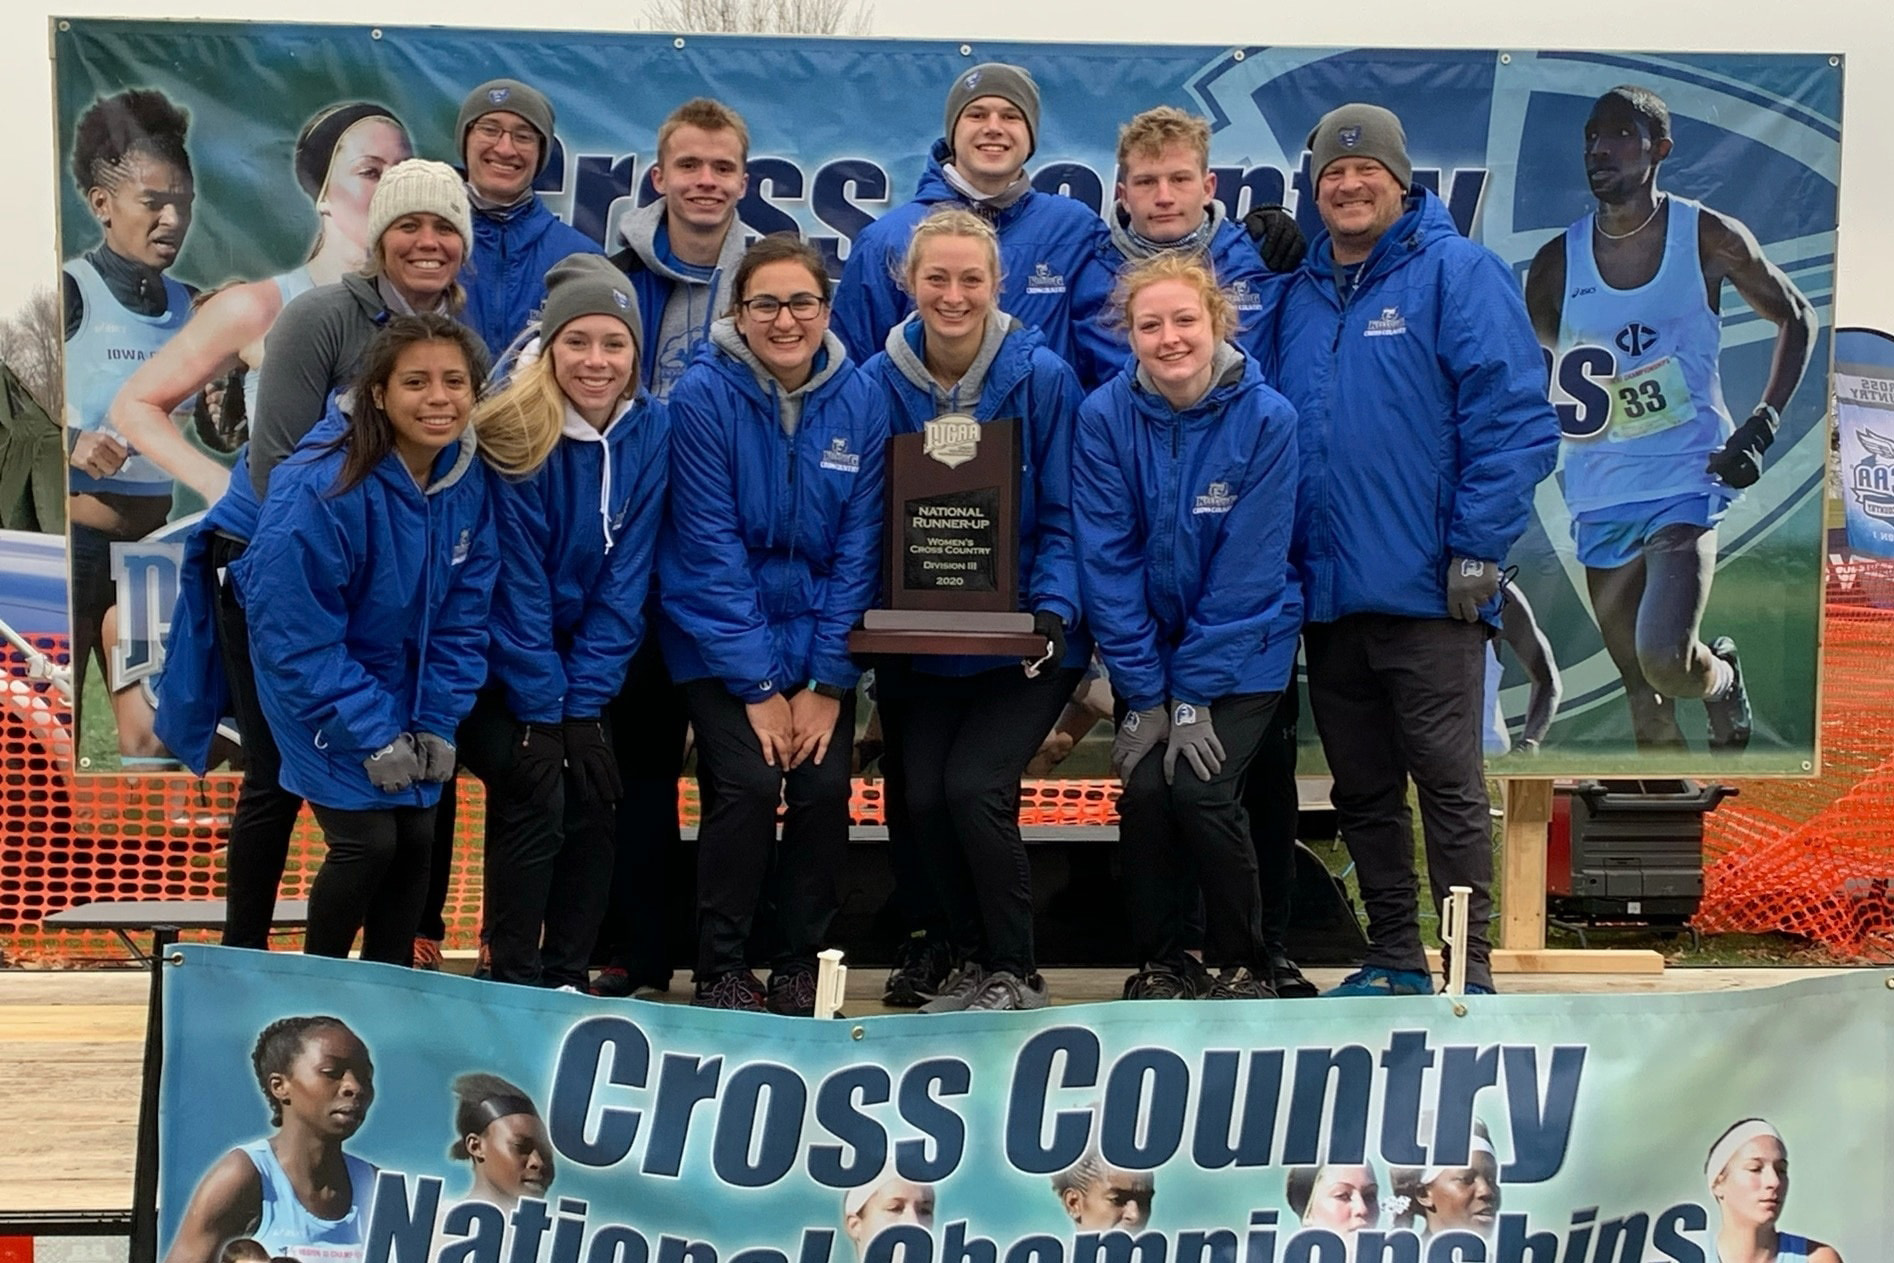 Women’s cross country team places second in the nation, four Bruins earn All-American honors at NJCAA National Championship